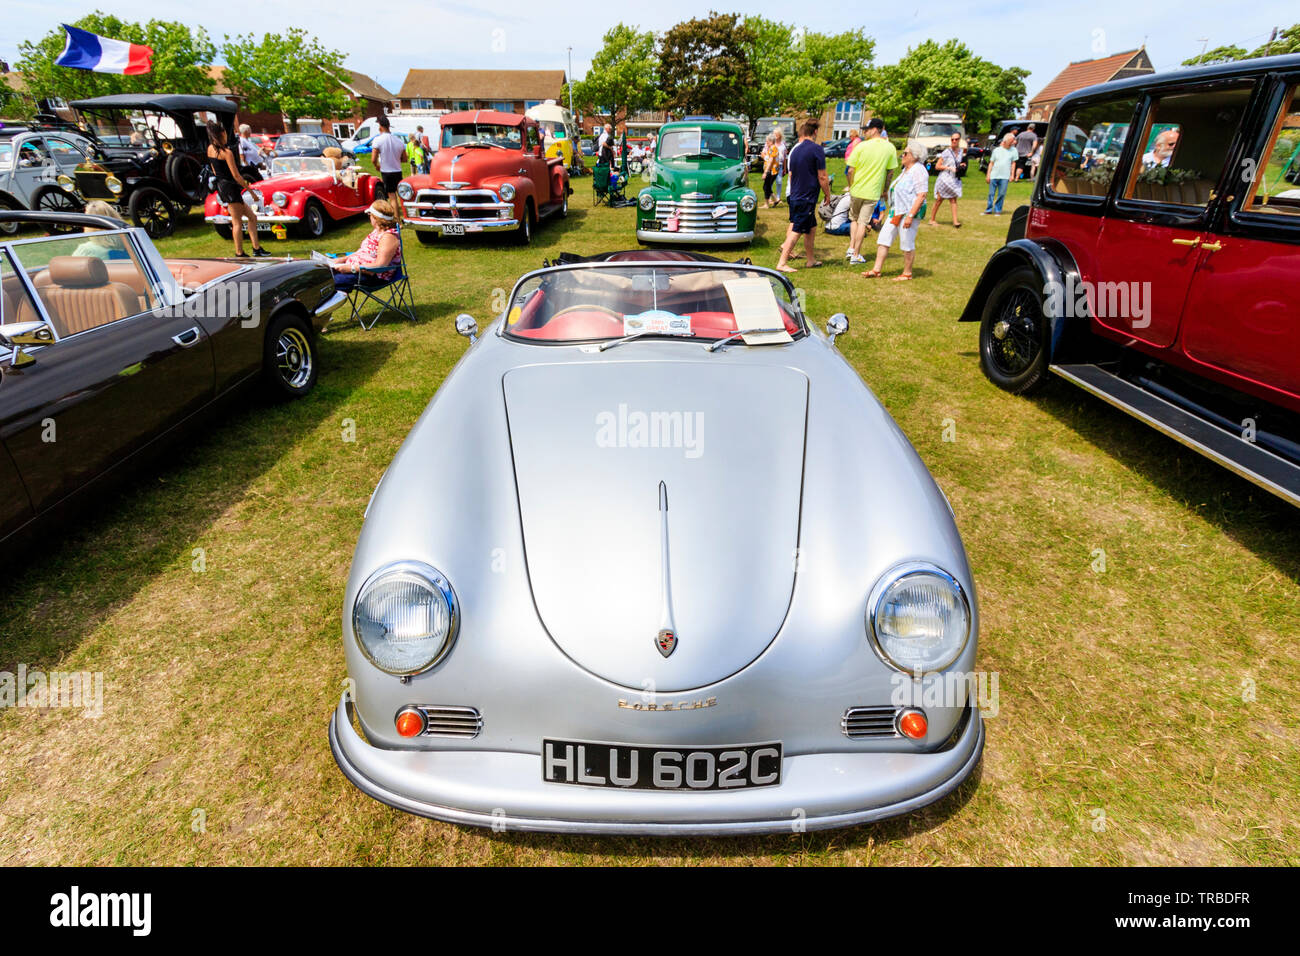 The 38th year of the annual bucket and Spade classic car run from Canterbury to Ramsgate seafront. Classic cars, old and modern, parked in rows on lawn with people walking around viewing them on bright sunny day. A early Porsche. Stock Photo